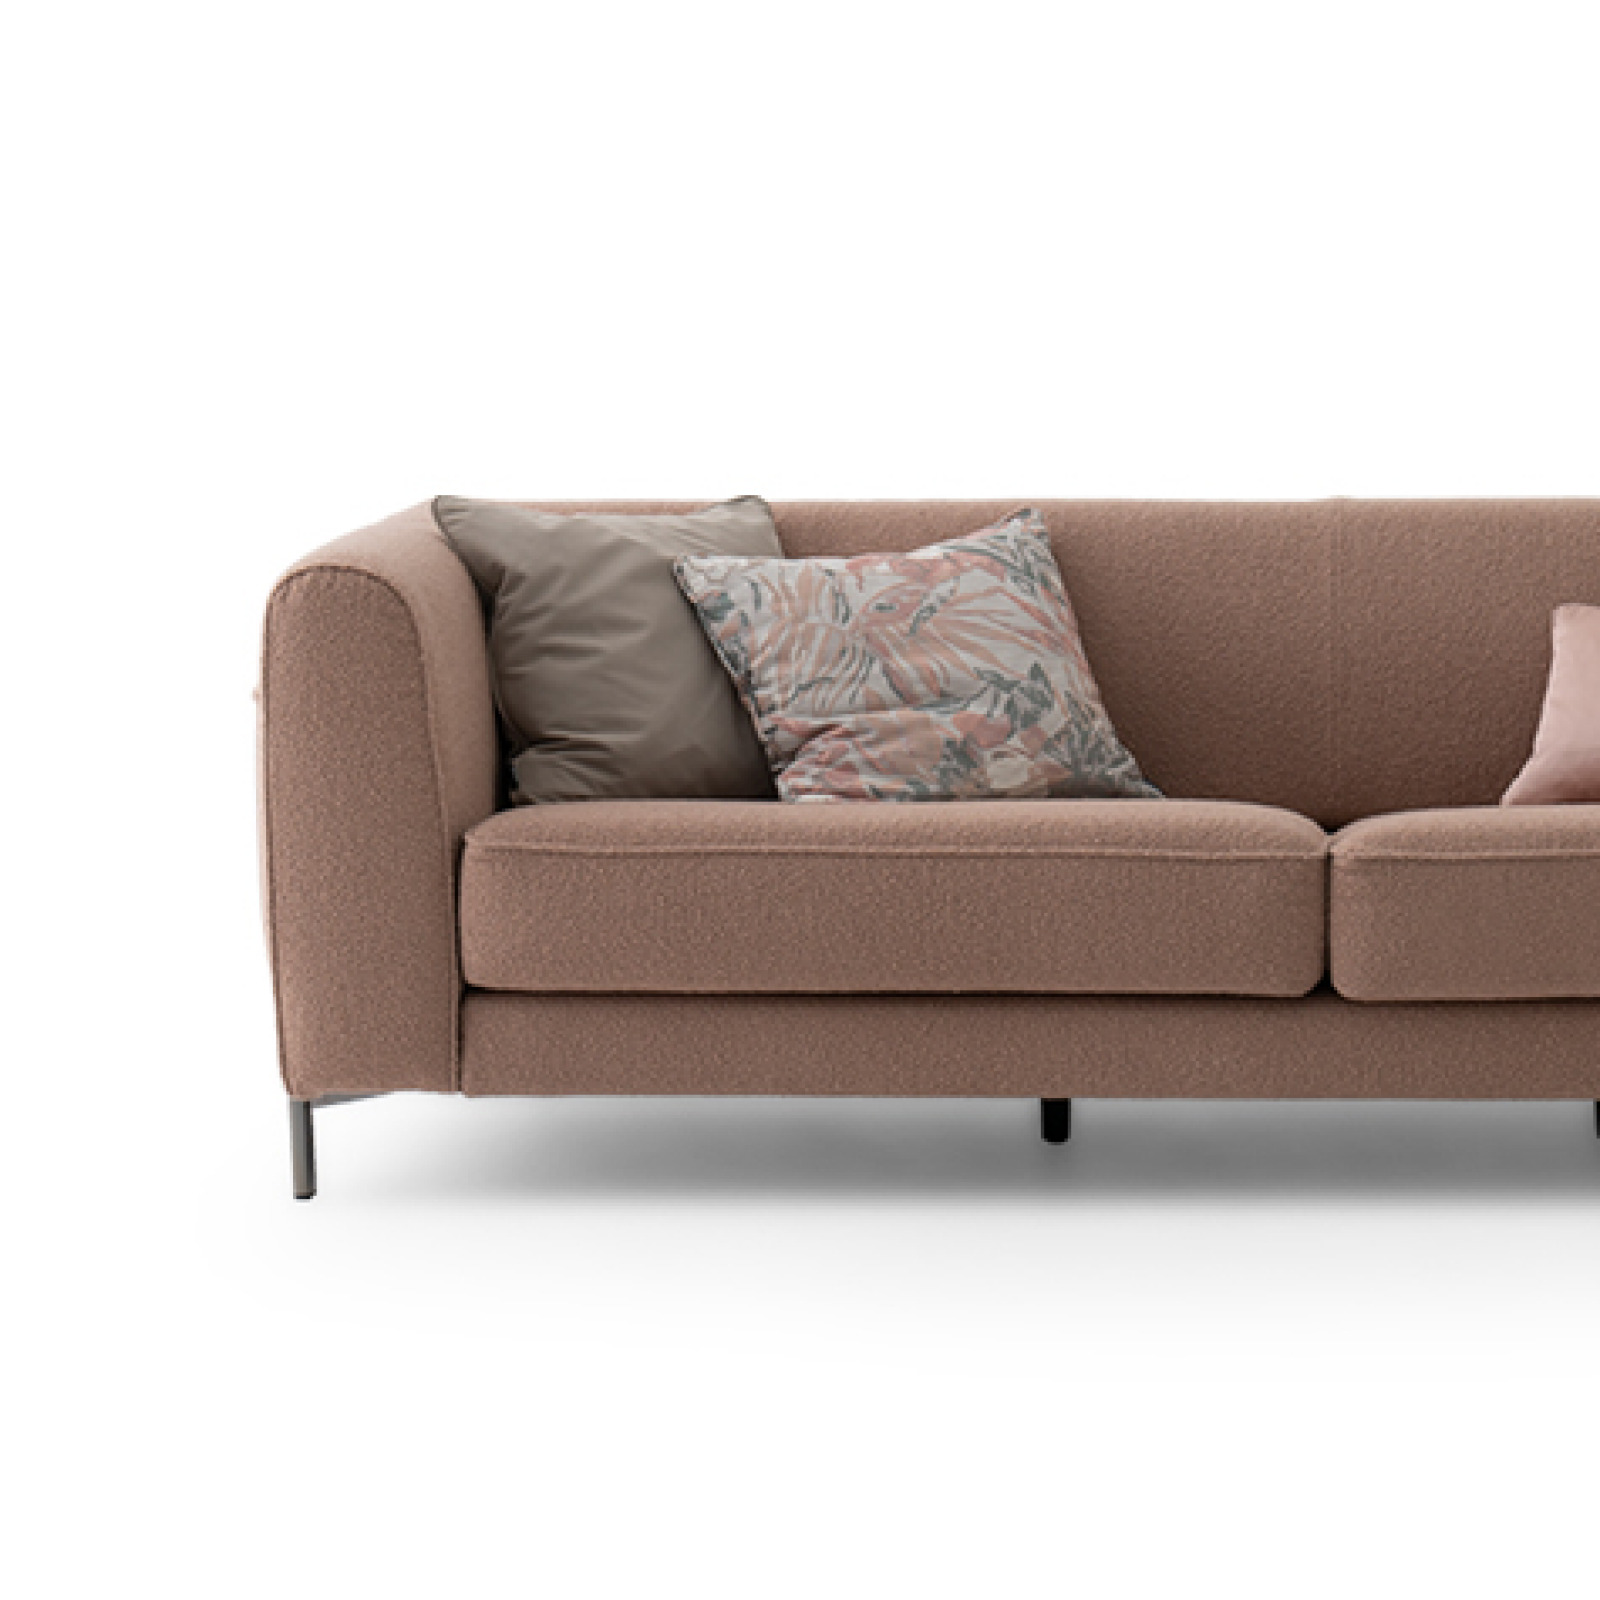 Amour mallow sofa bed